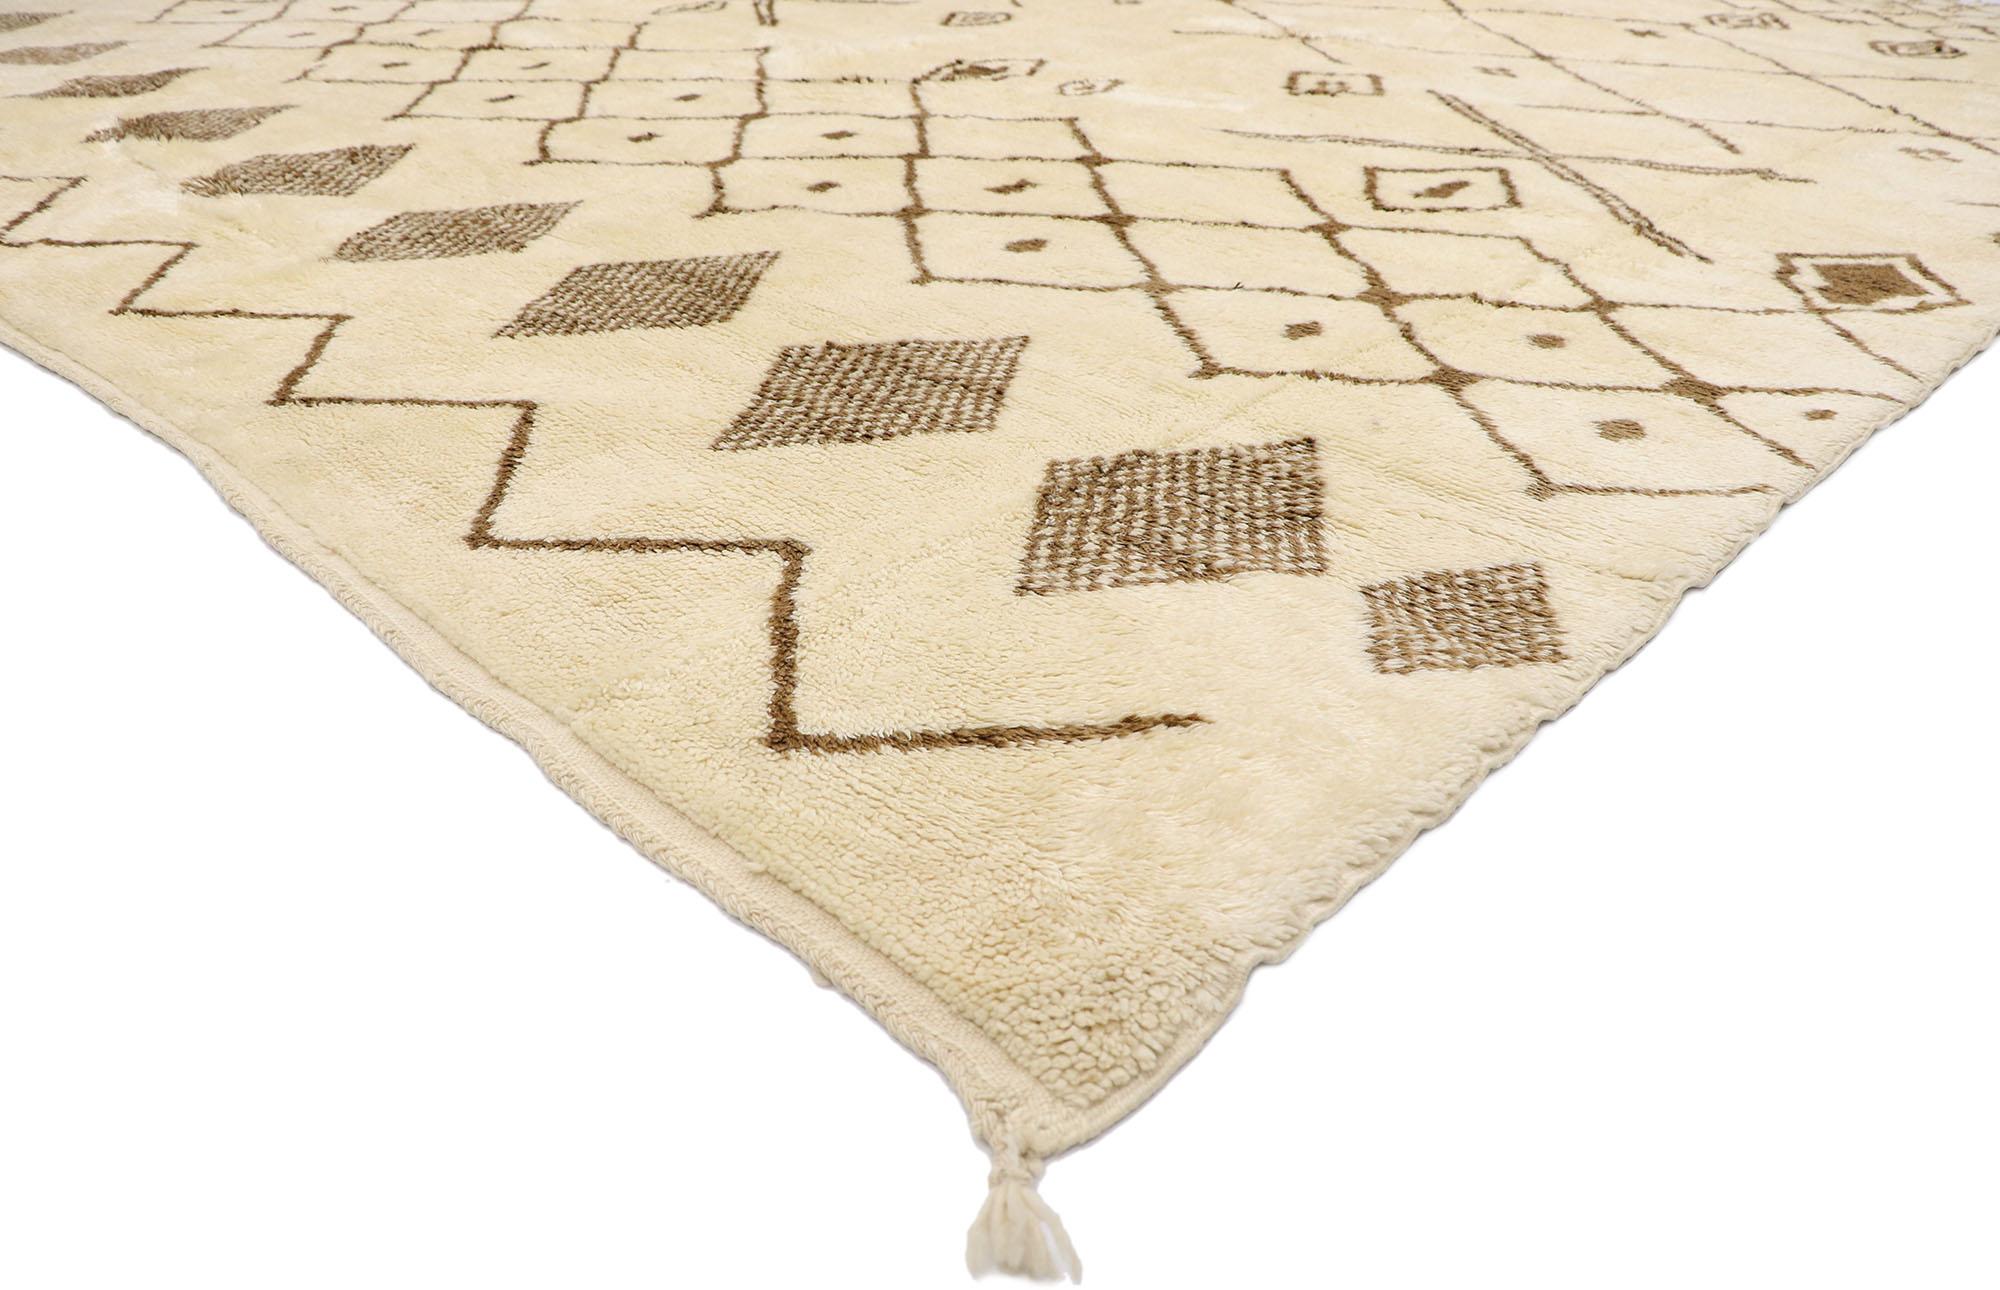 ​21141 Large Neutral Berber Moroccan Rug, 11'11 x 13'02.
Emulating nomadic charm with incredible detail and lavish texture, this hand knotted wool neutral Moroccan rug is a captivating vision of woven beauty. The tribal design and neutral earthy